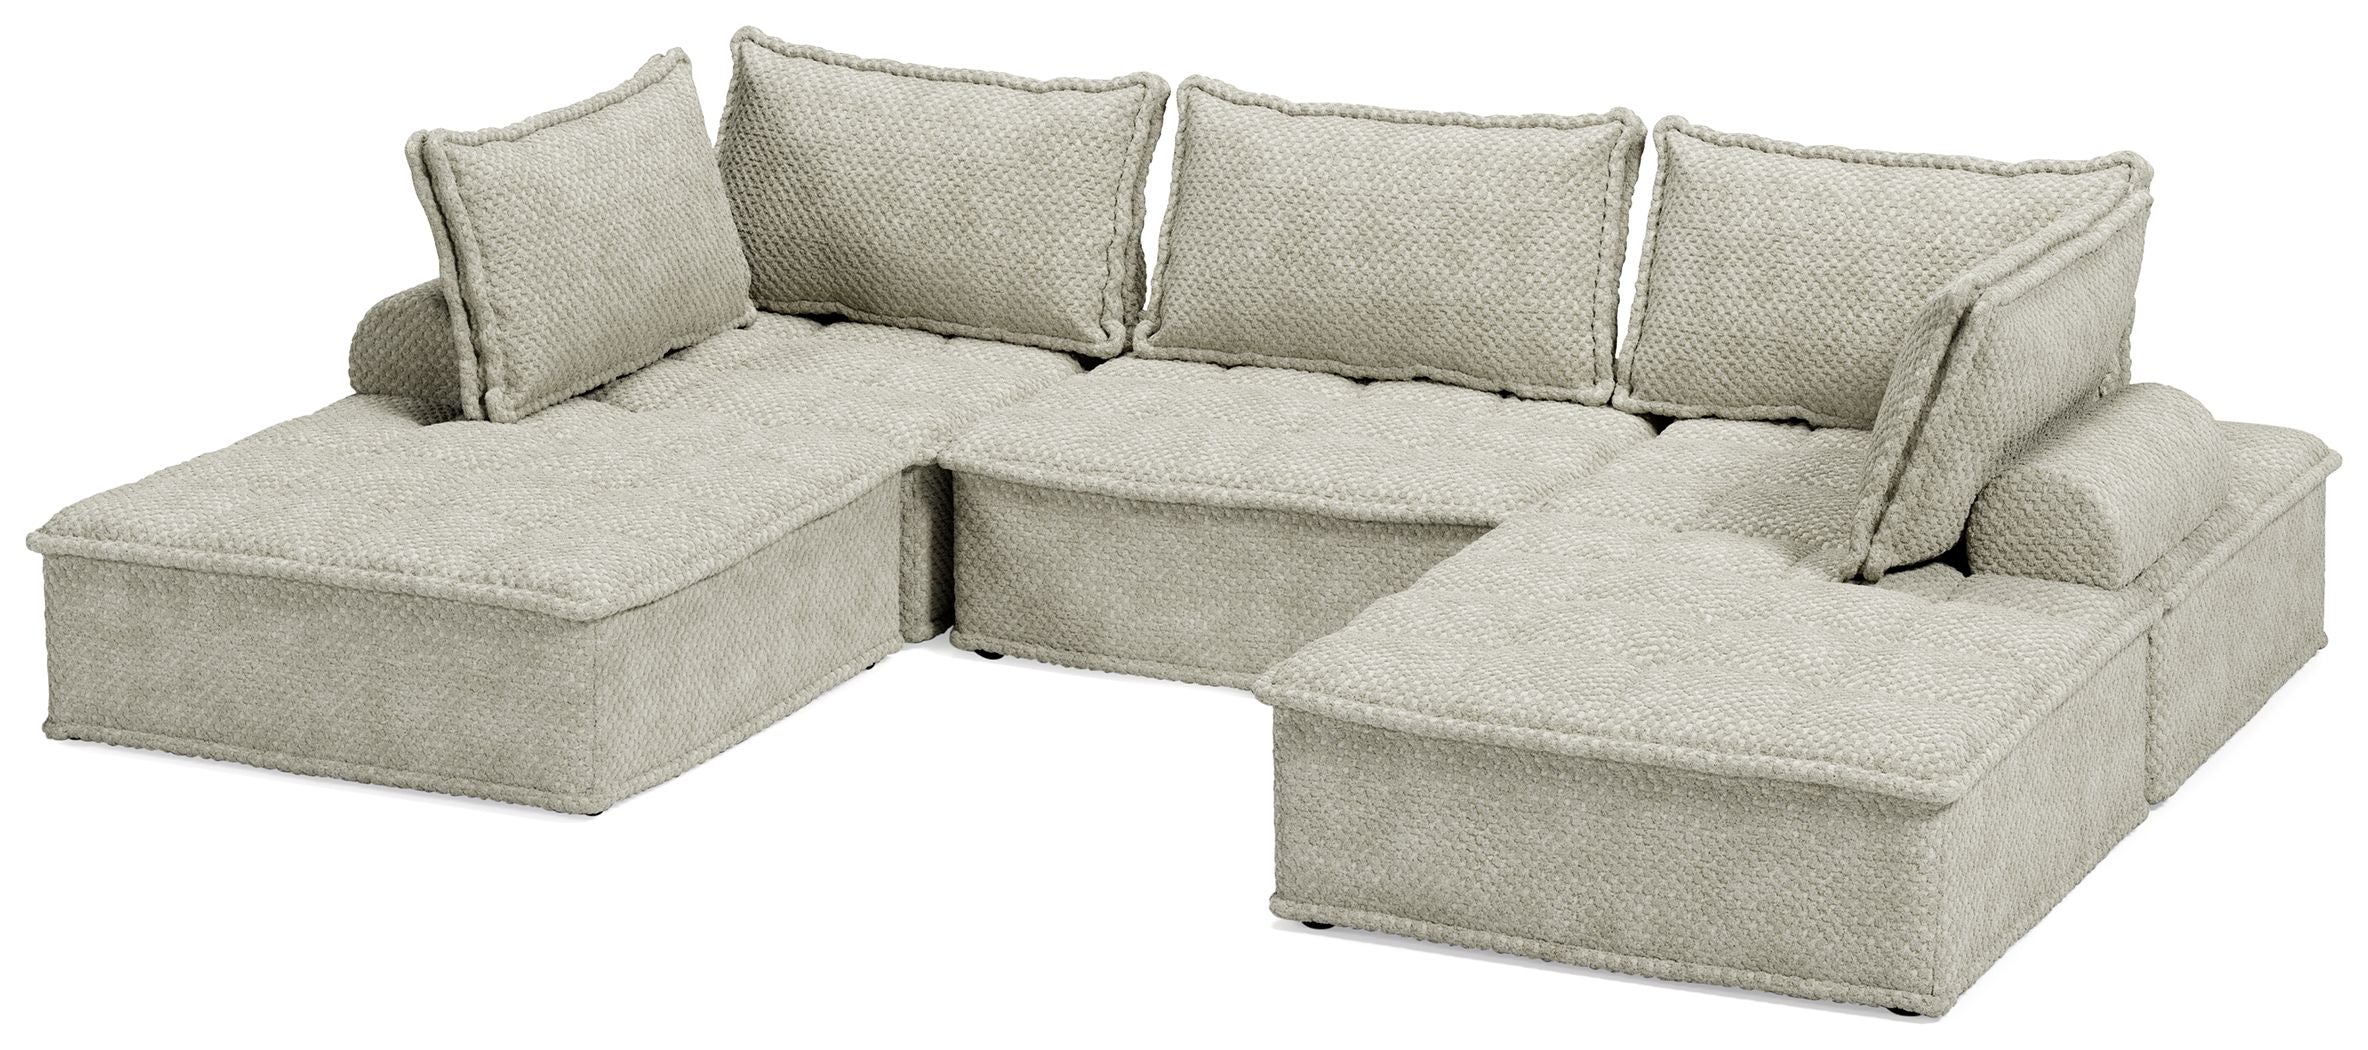 Signature Design by Ashley Bales Modular Seating - Modern, Plush, Customizable-Stationary Sectionals-American Furniture Outlet